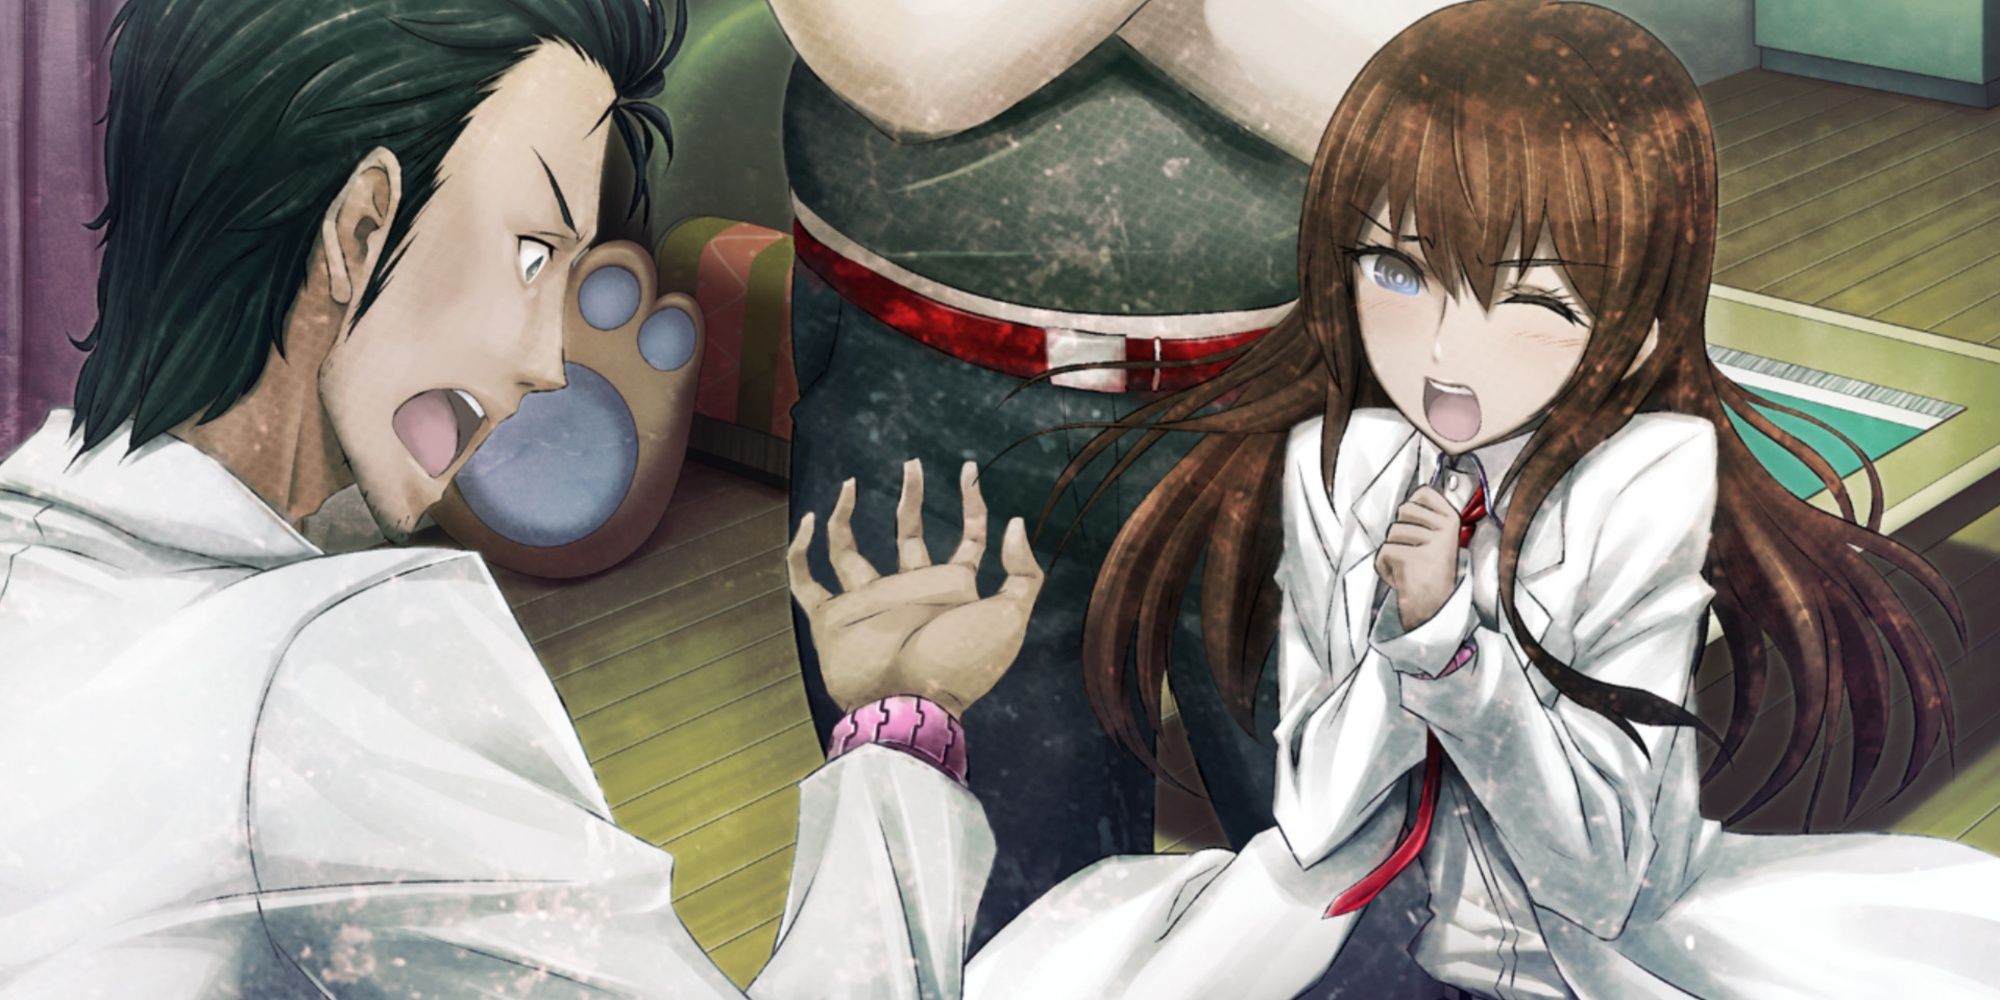 man and woman in steins;gate my darling's embrace